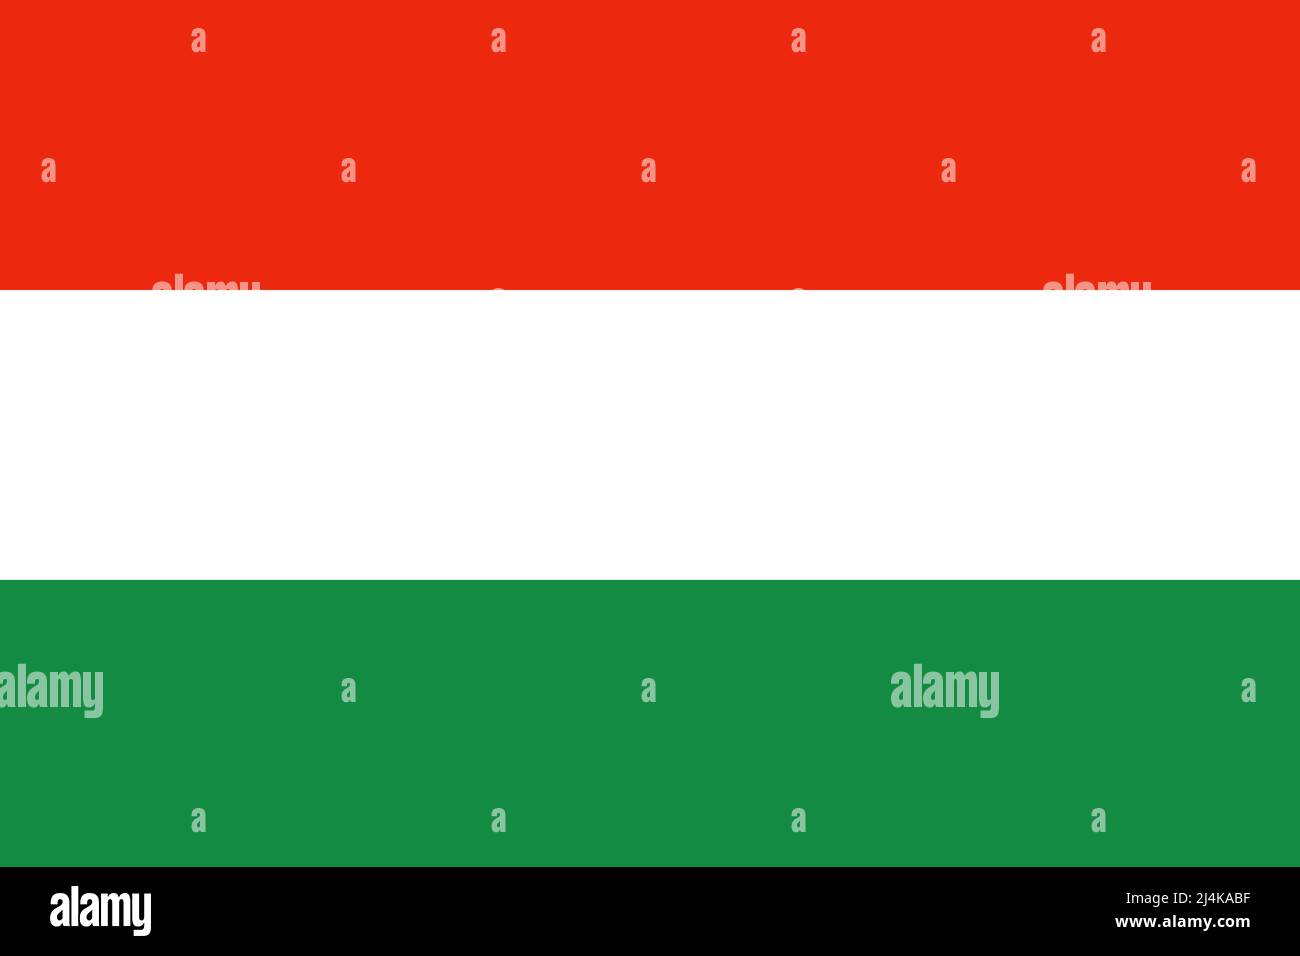 The red, white and green flag of Hungary. Stock Photo